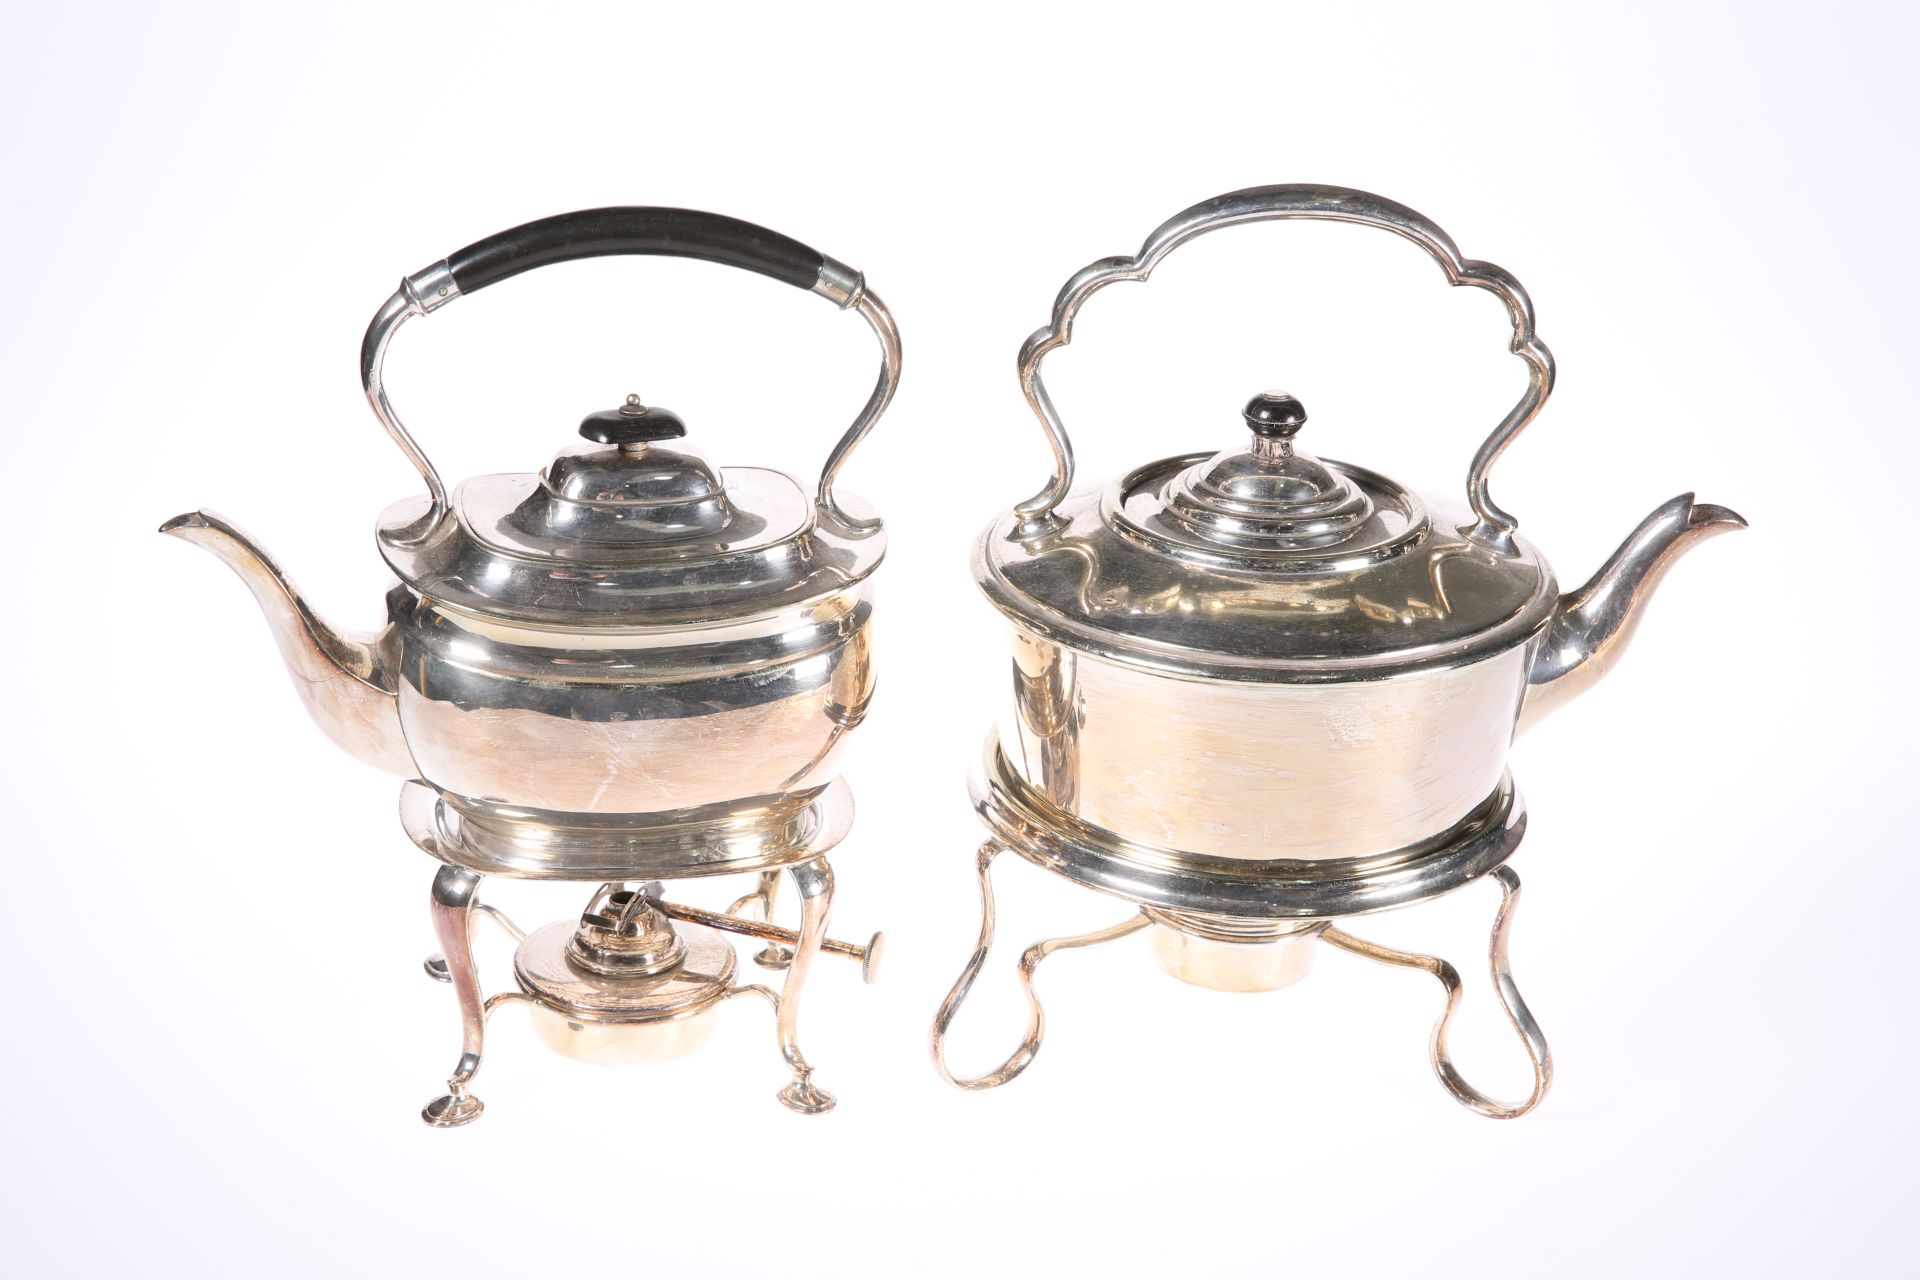 TWO EDWARDIAN SILVER-PLATED SPIRIT KETTLES, the first by Atkin Bros